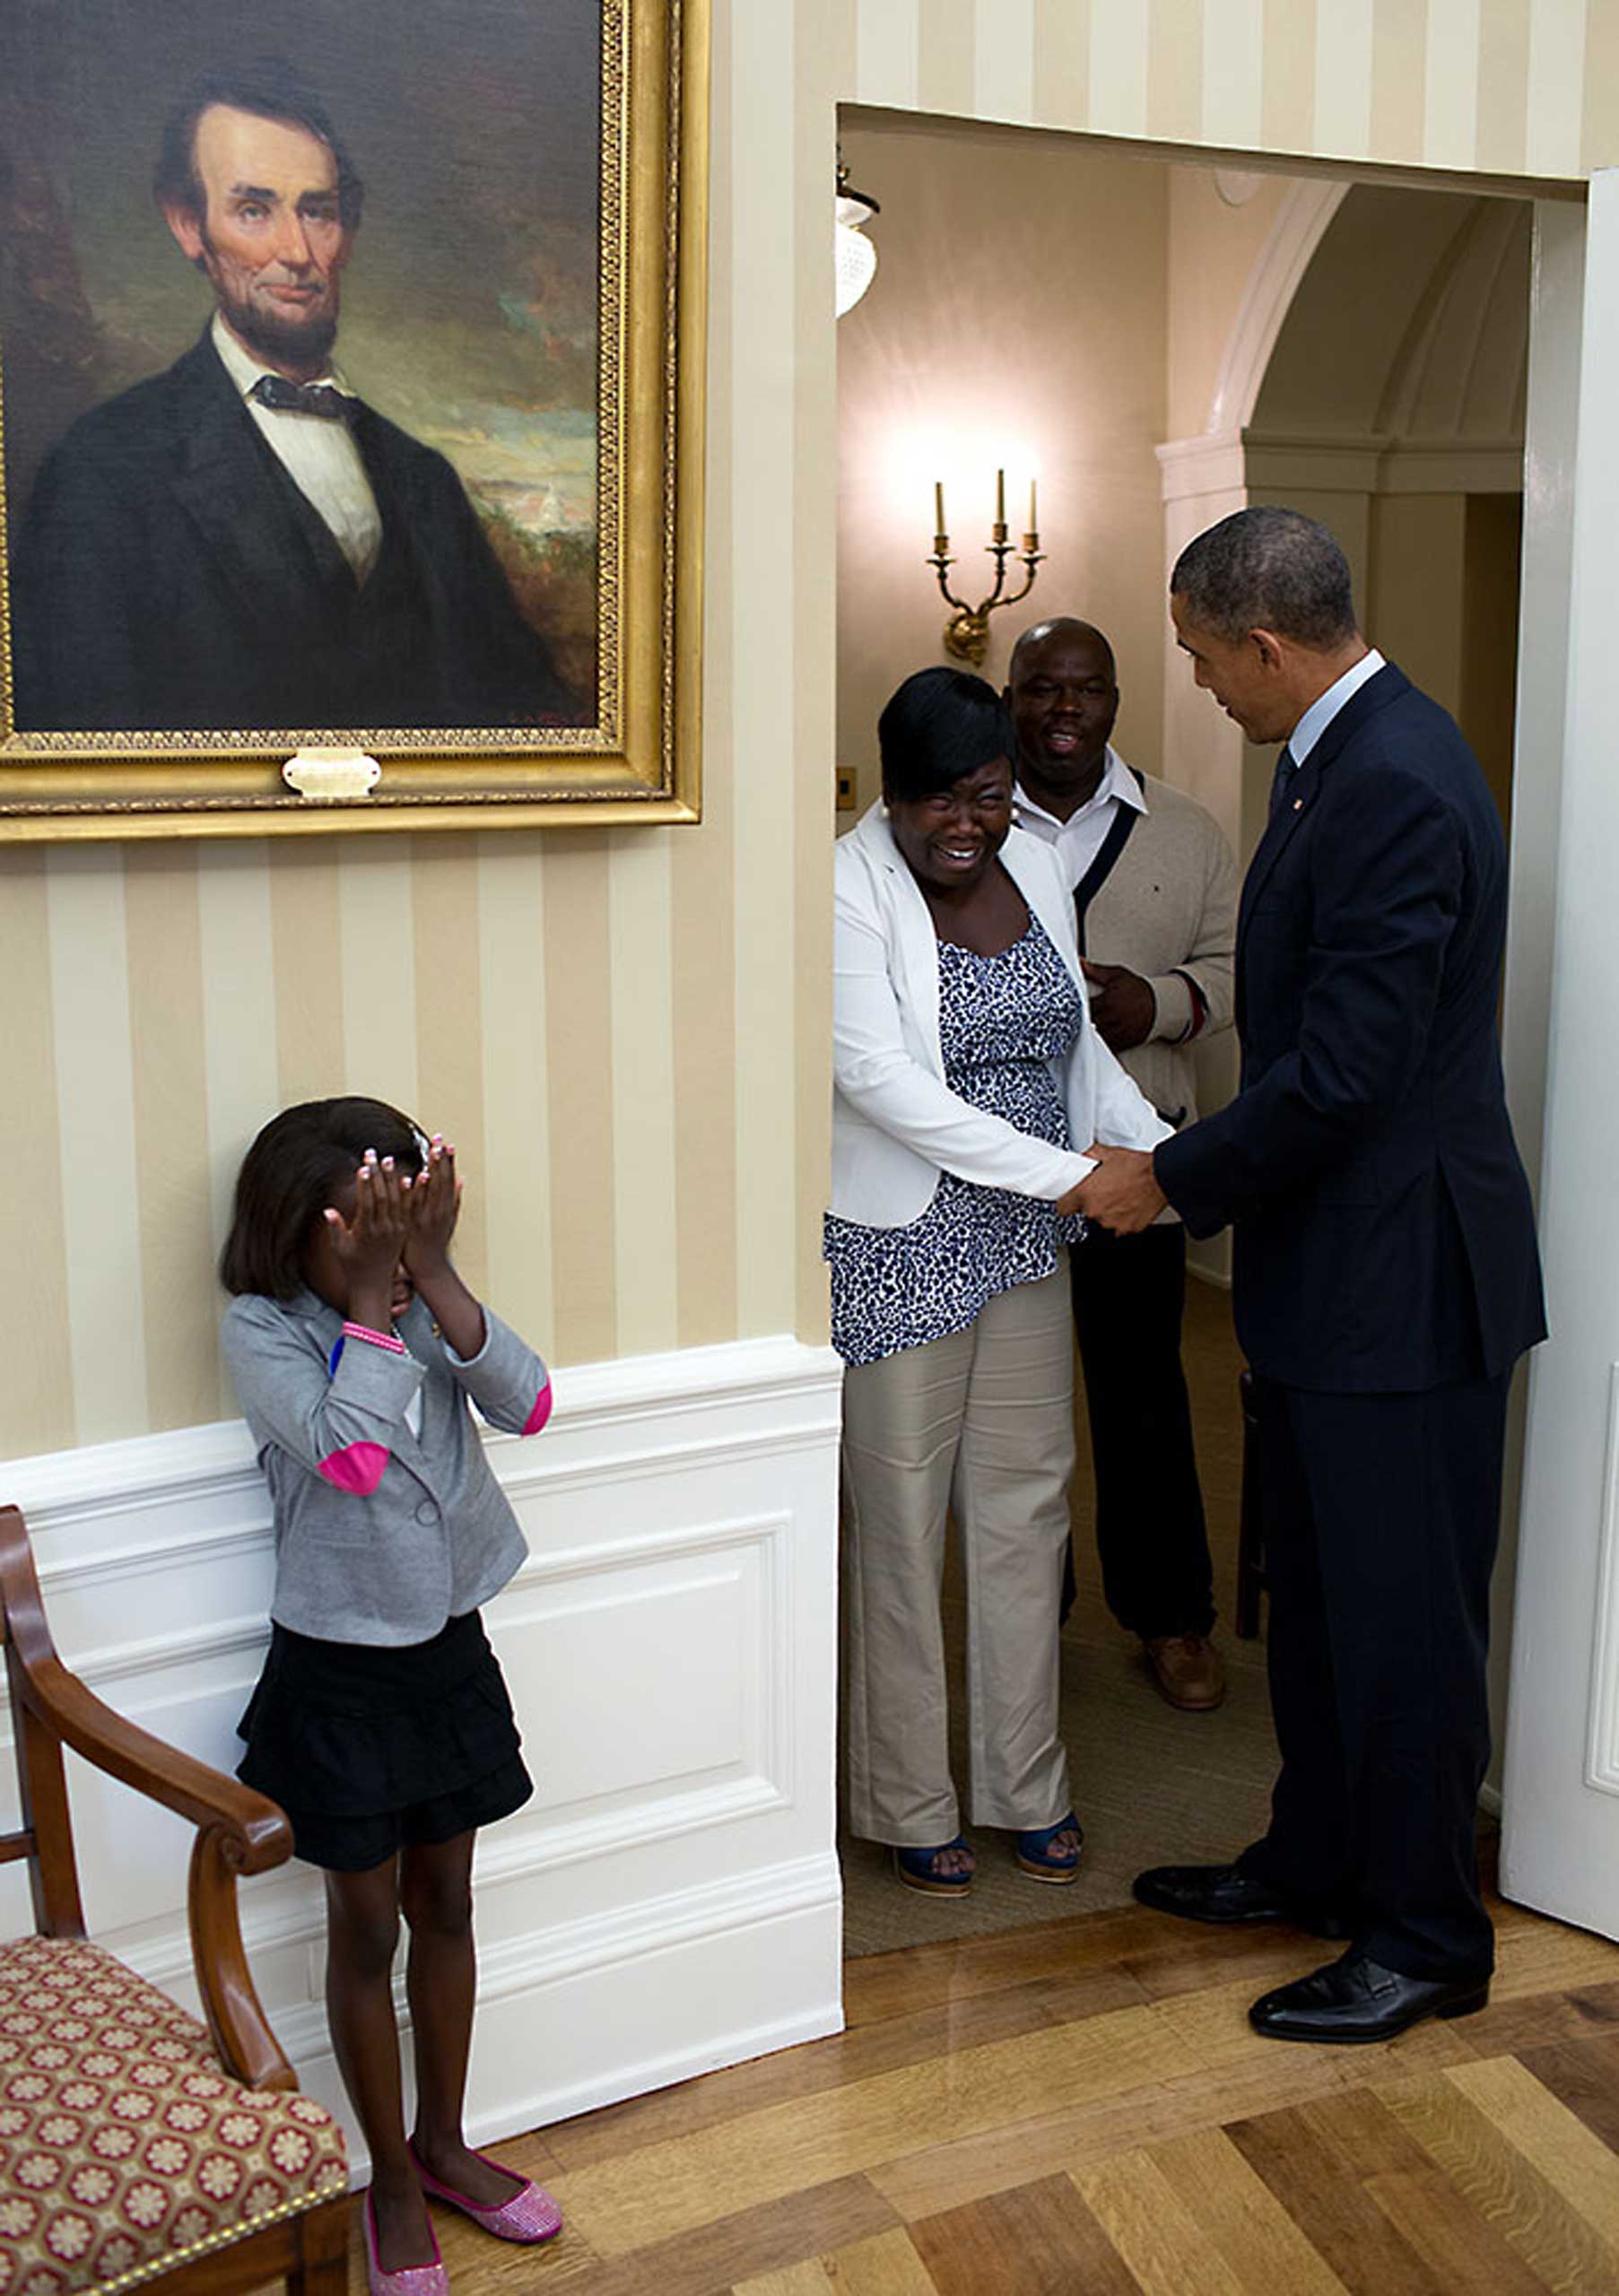 Eight-year old Make-A-Wish child Janiya Penny reacts after meeting President Barack Obama as he welcomes her family to the Oval Office, Aug. 8, 2012.